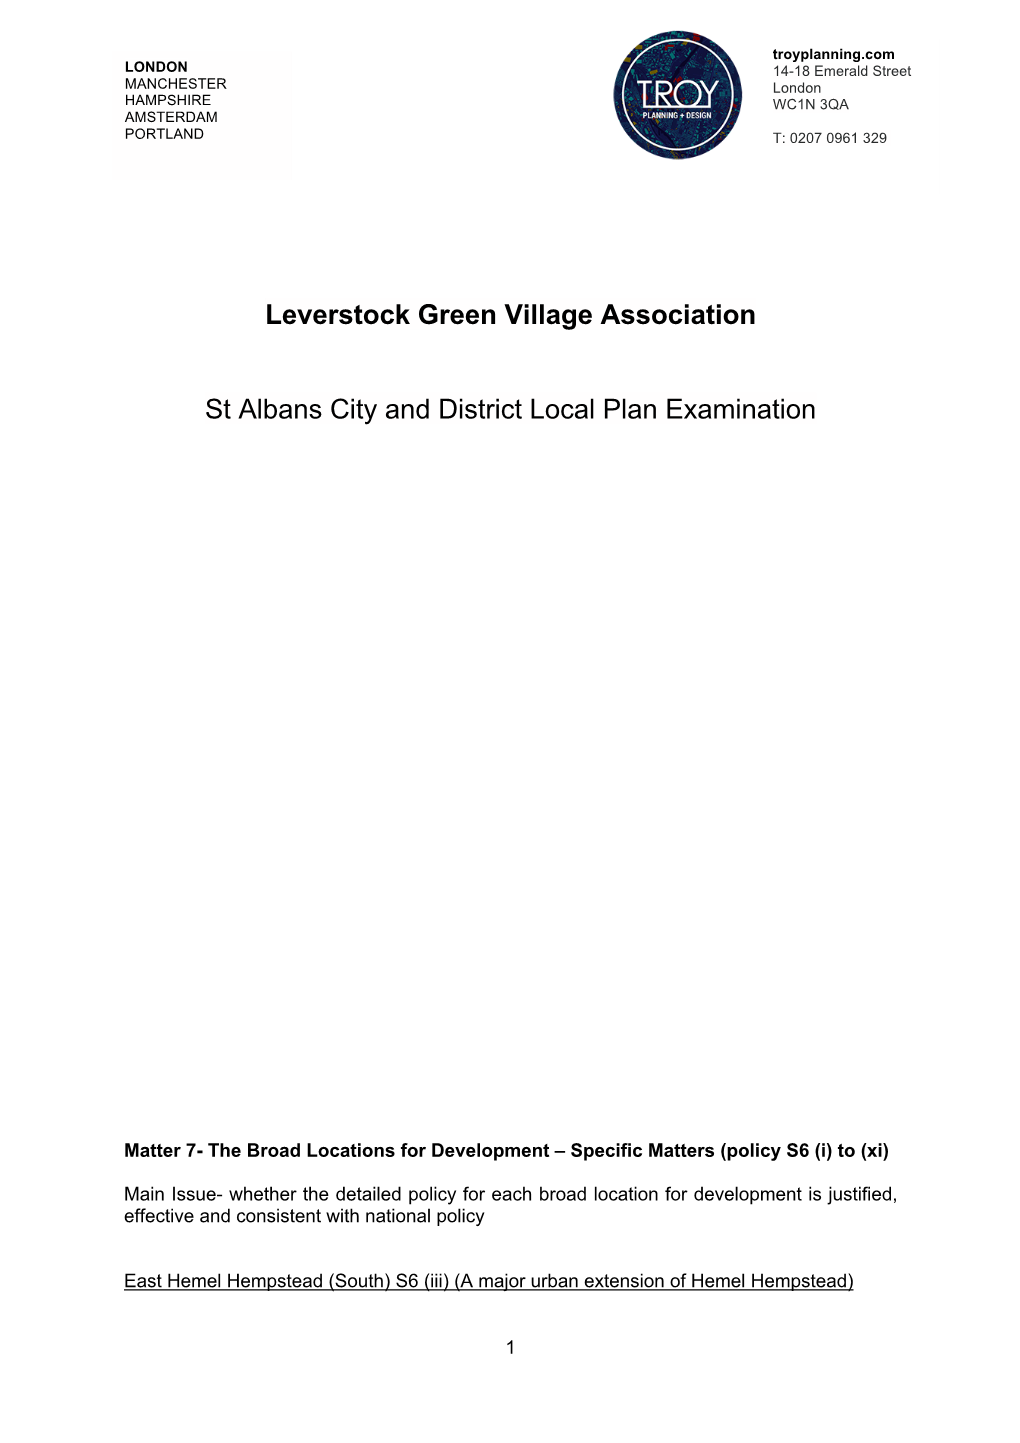 Leverstock Green Village Association St Albans City and District Local